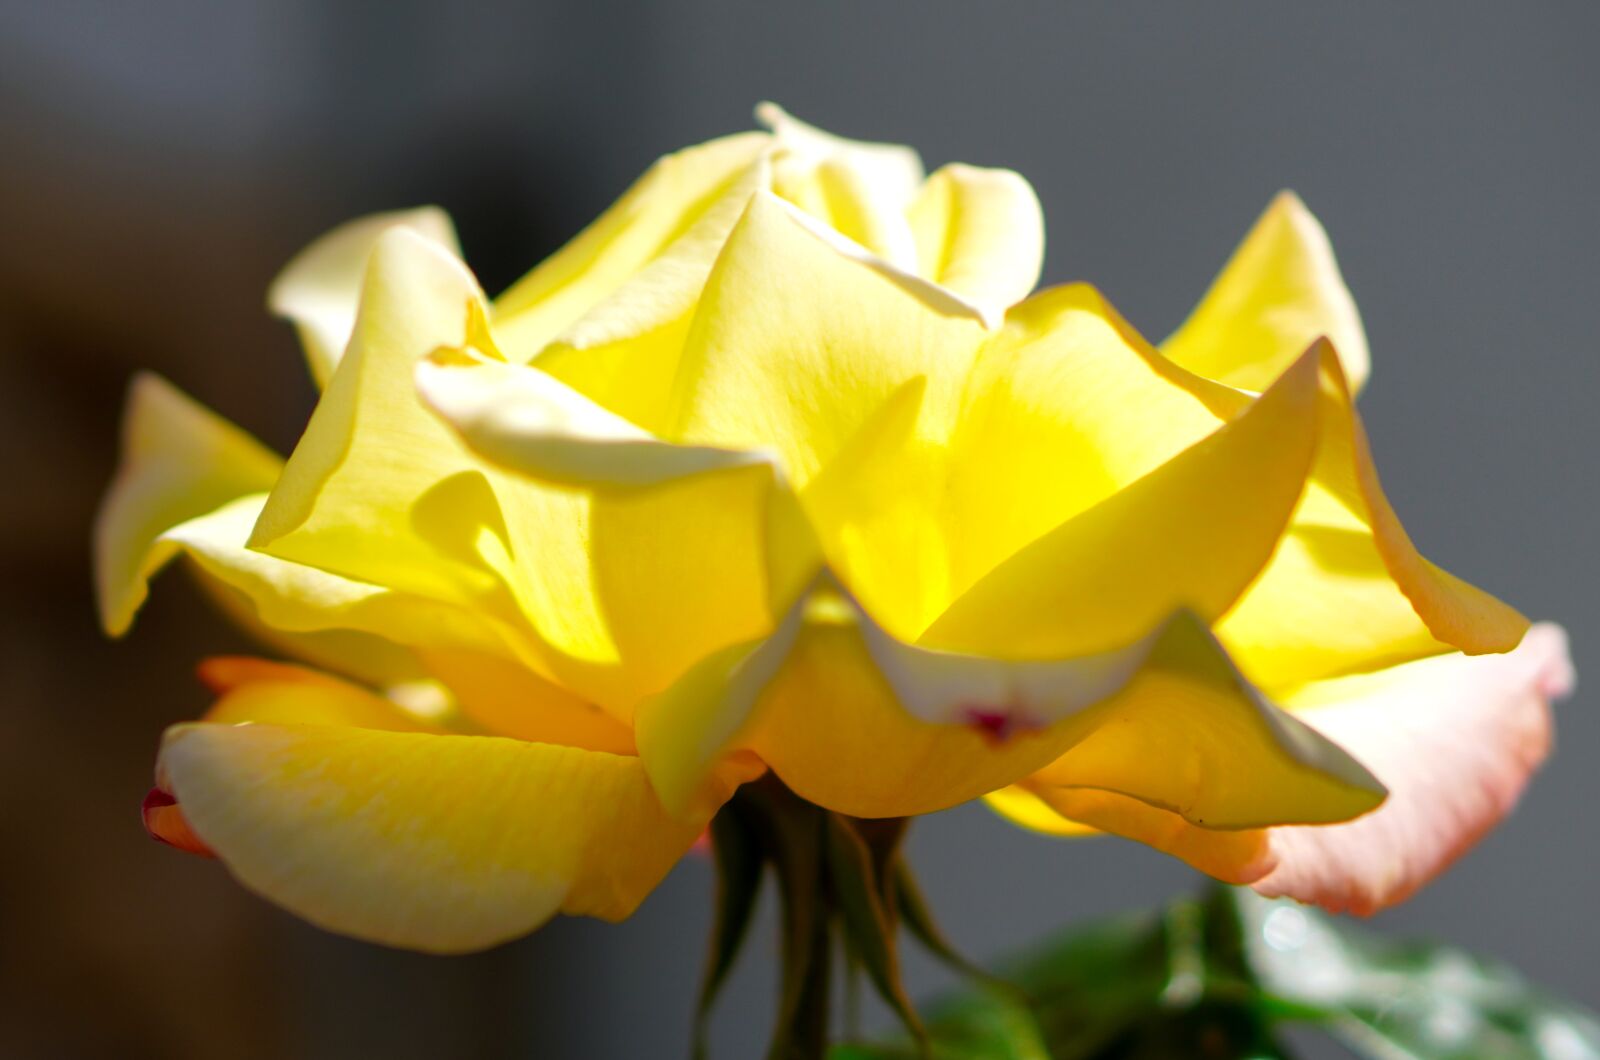 Sony a6400 sample photo. Rose, yellow, flower photography